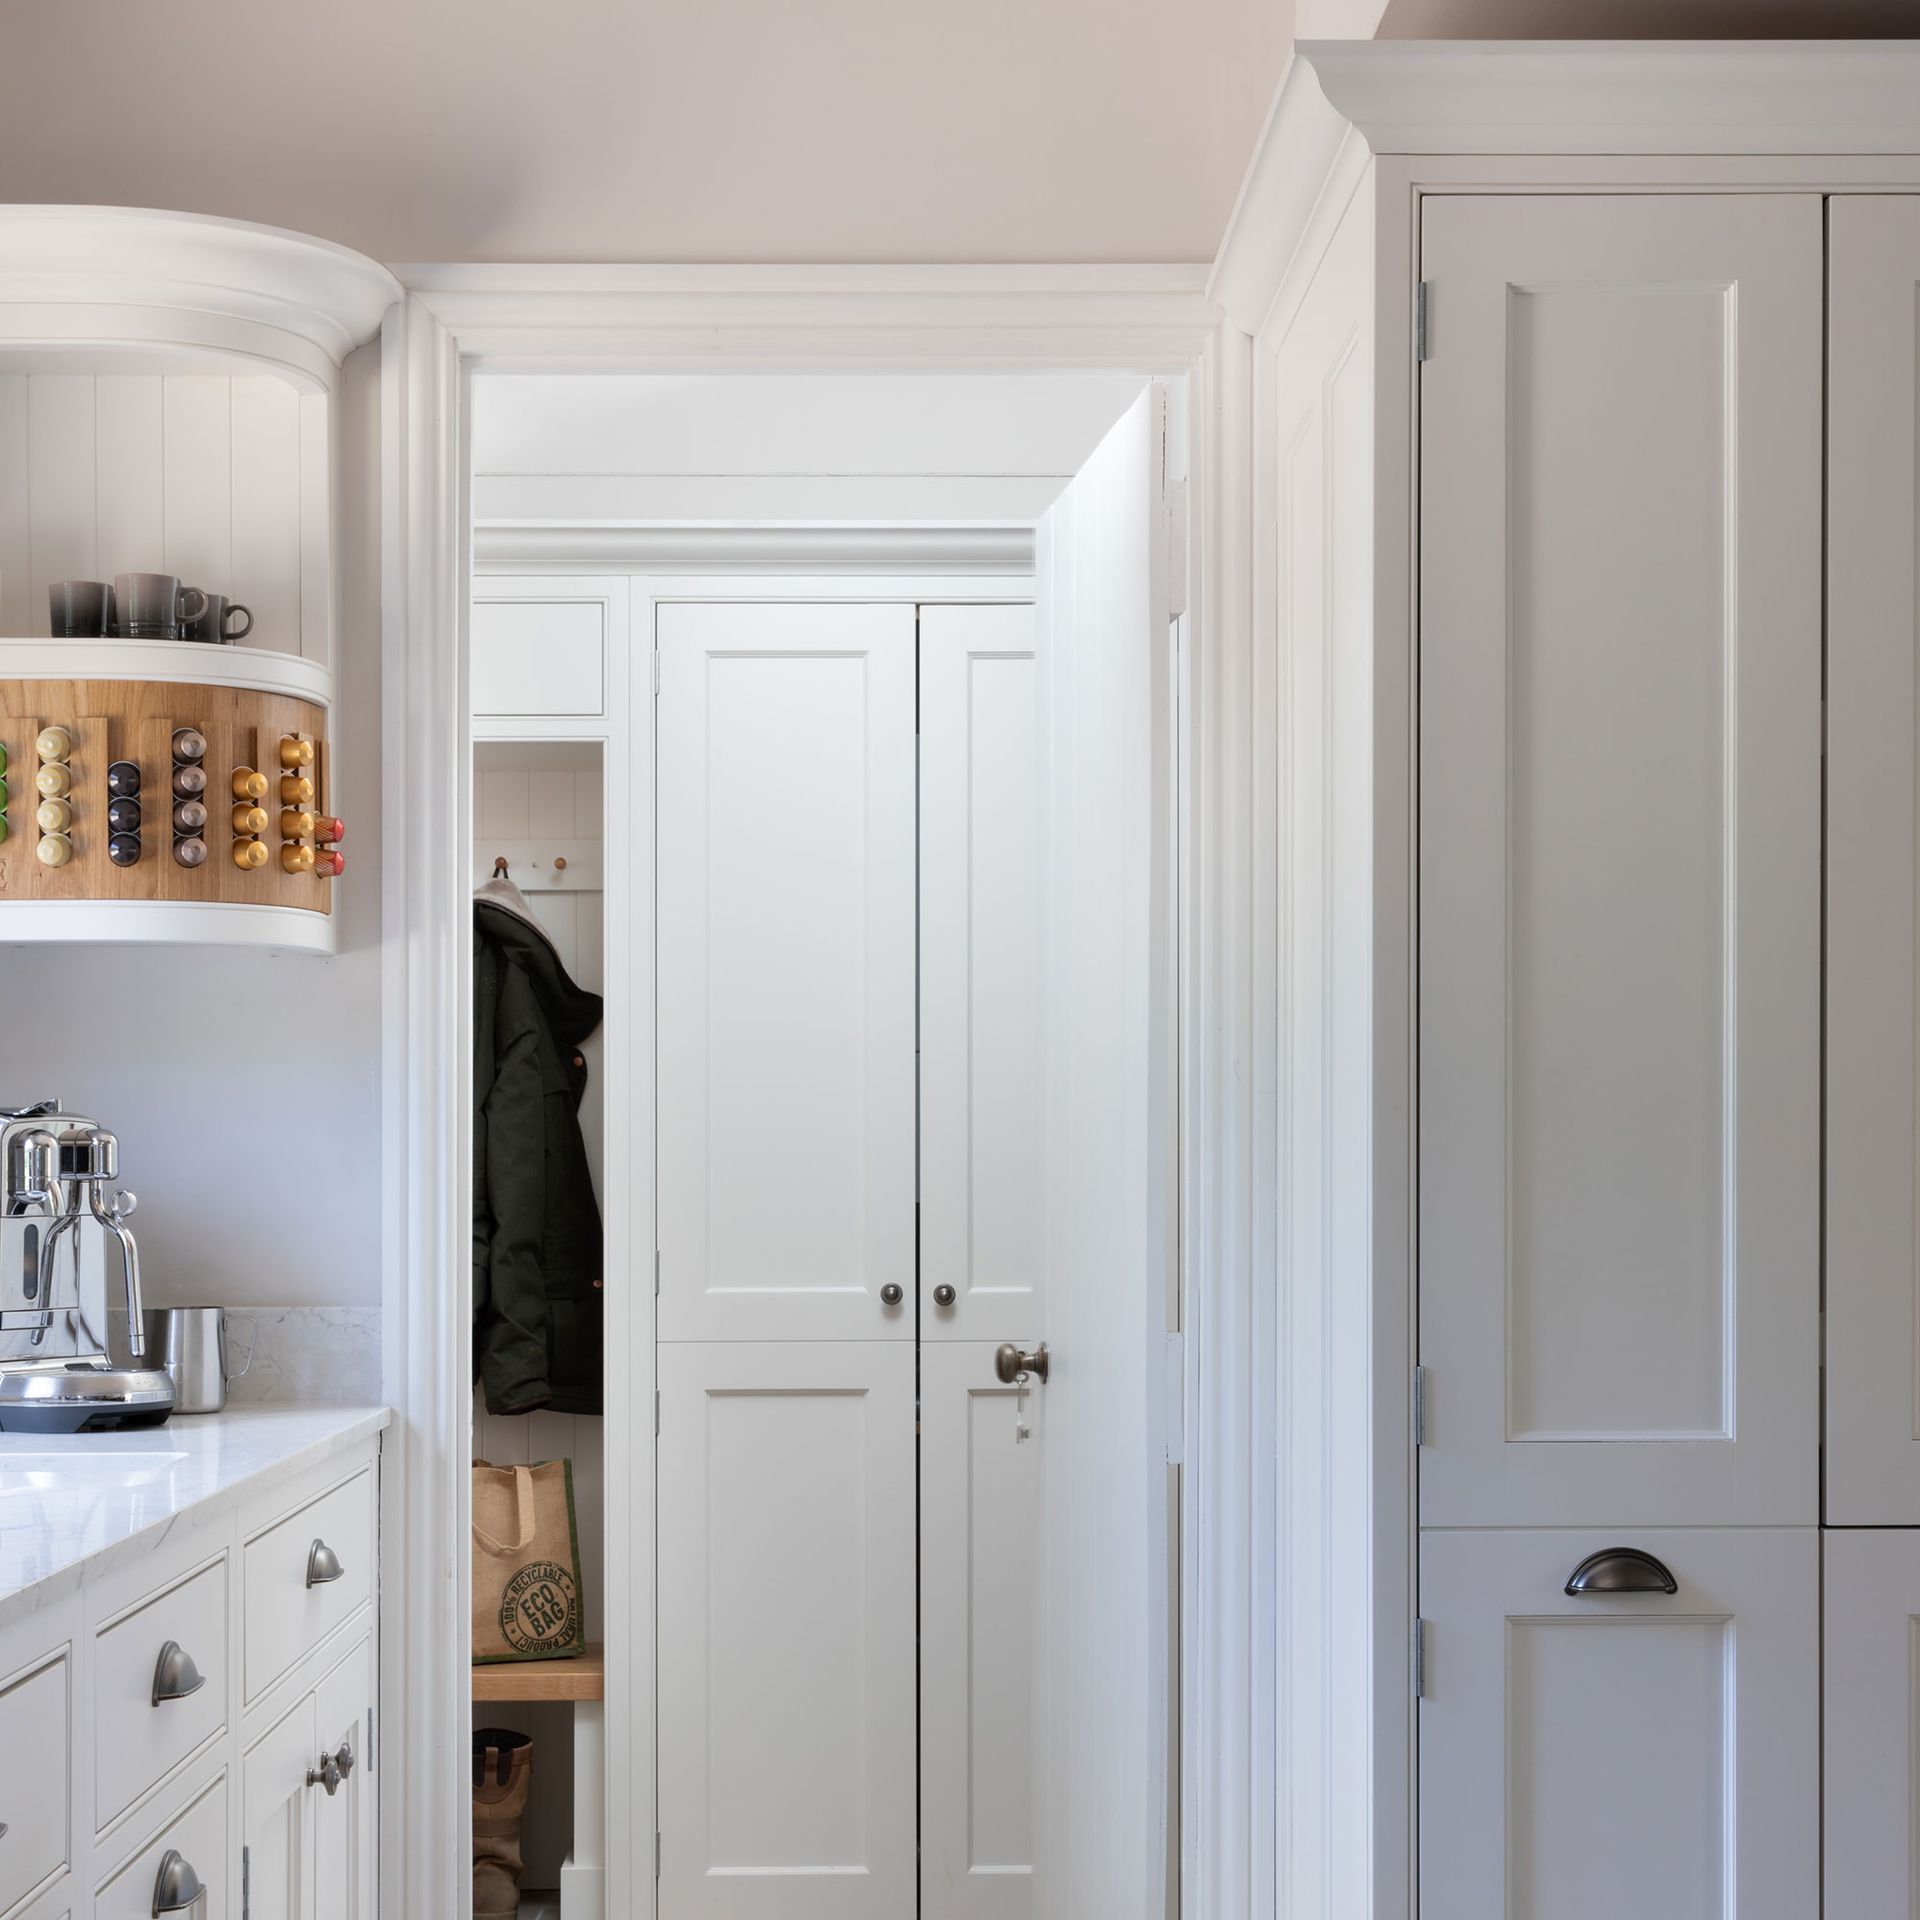 <p>                     'Often in country-style kitchens, we add additional living spaces such as boot rooms, walk-in pantries and utility rooms,' says Keith Myers, Designer, The Myers Touch. 'These can match or contrast to the style in the main country kitchen to ensure the space remains clutter-free, clean and fully functional.                   </p>                                      <p>                     Boot and utility rooms go hand in hand with country kitchen decor. After all, if you were living the full country life experience you'd need somewhere to dump your muddy wellies, get the lead off your pup and bring freshly cut flowers from the garden. That's our dream, anyway!                   </p>